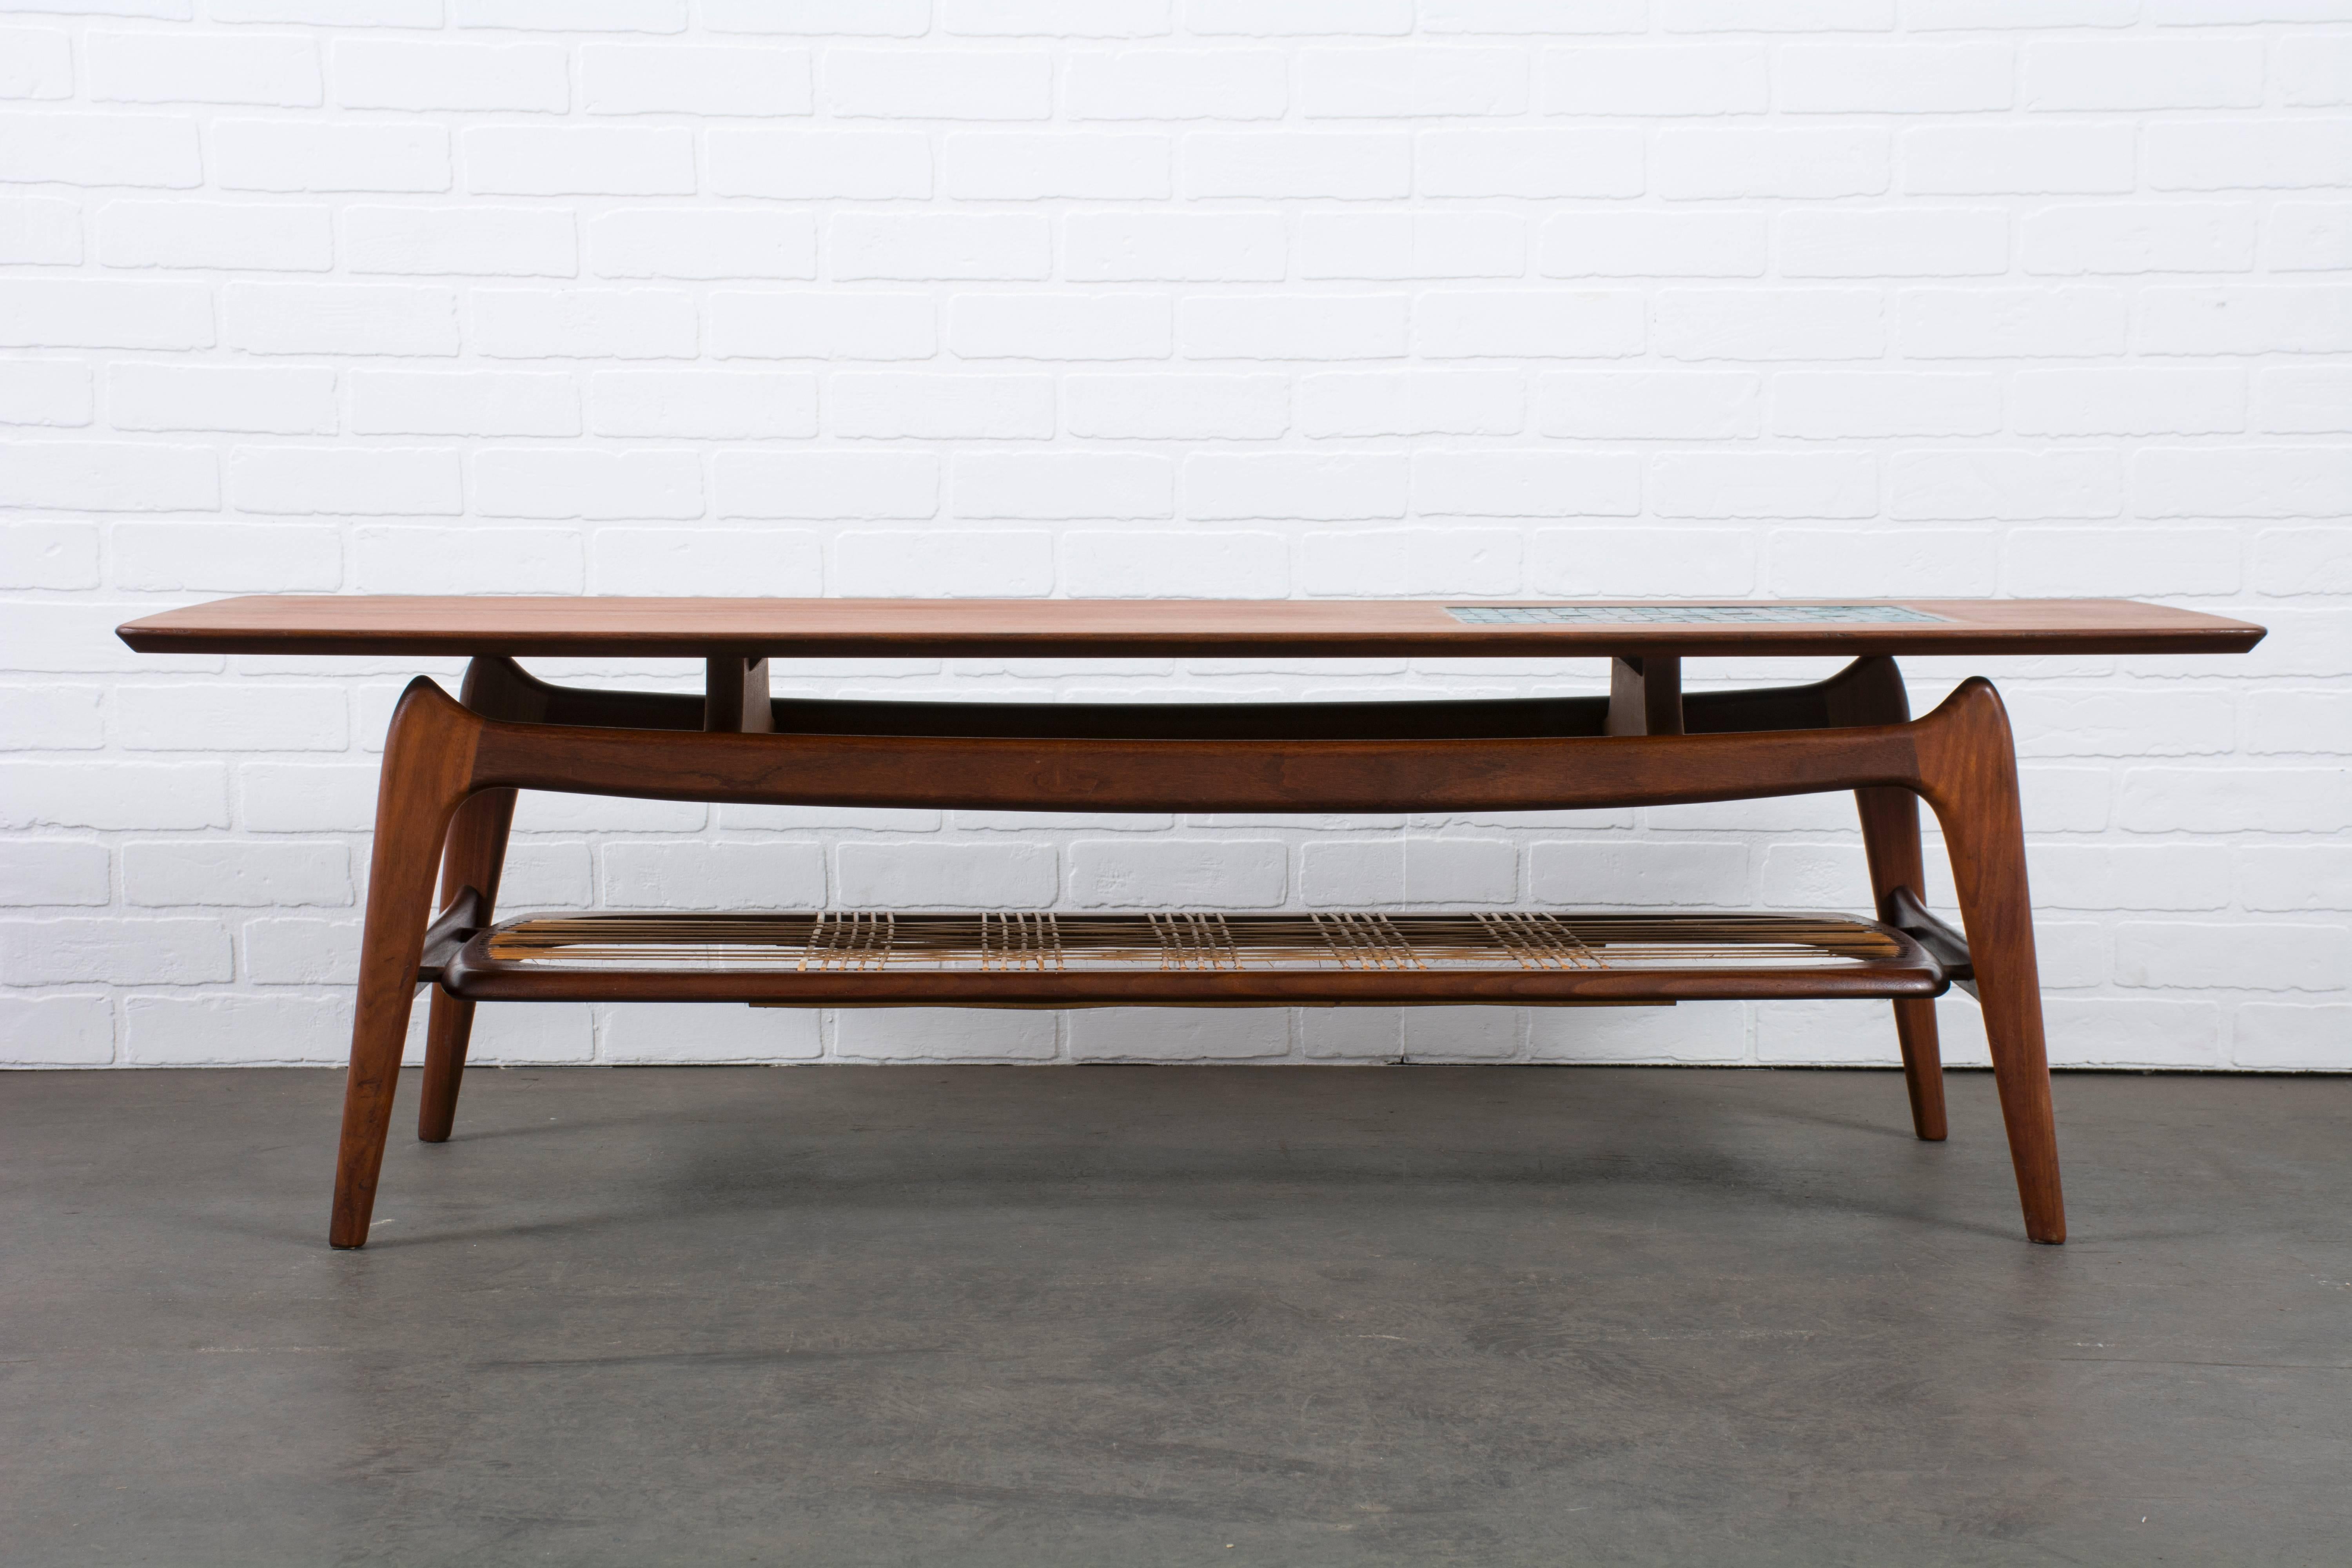 This sculptural teak coffee table was designed by Louis Van Teeffelen for Wébé Meubelen (Netherlands) in the 1950s. It has a glass tile inlay on the top and a Minimalist rattan shelf below. Labeled Wébé Meubelen.